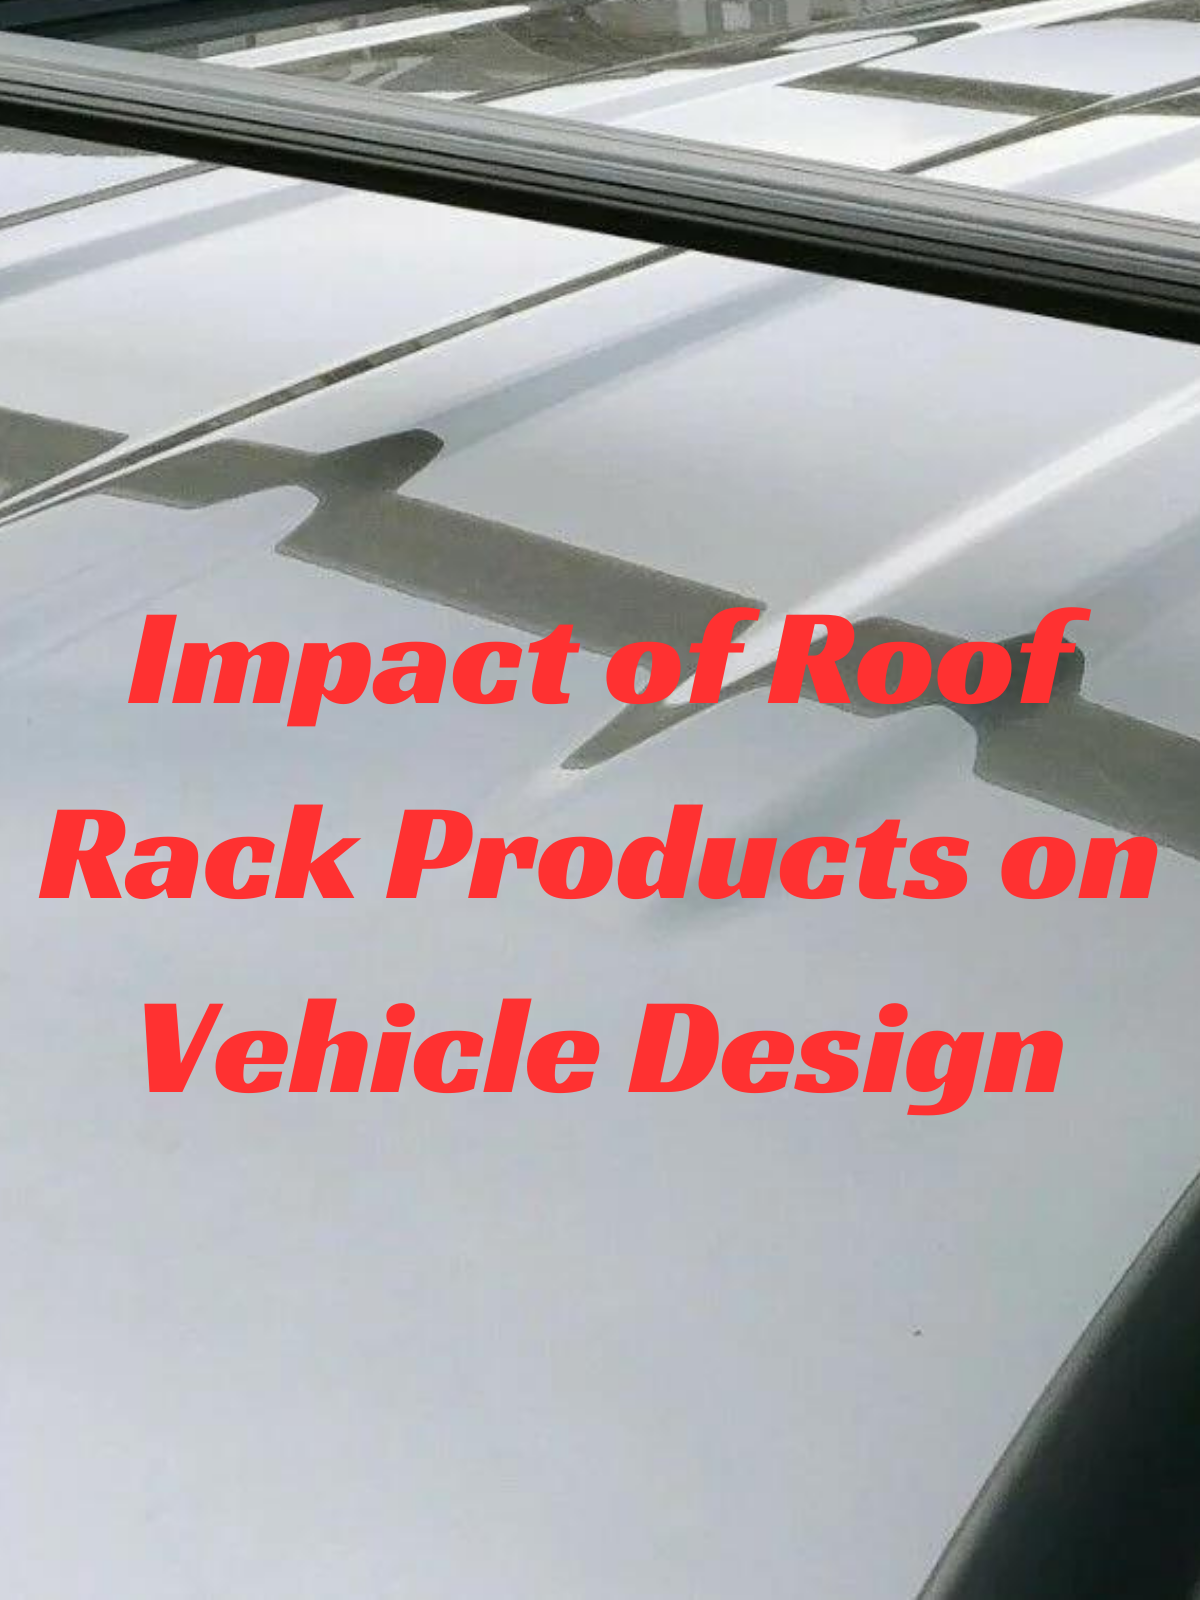 Impact of Roof Rack Products on Vehicle Design